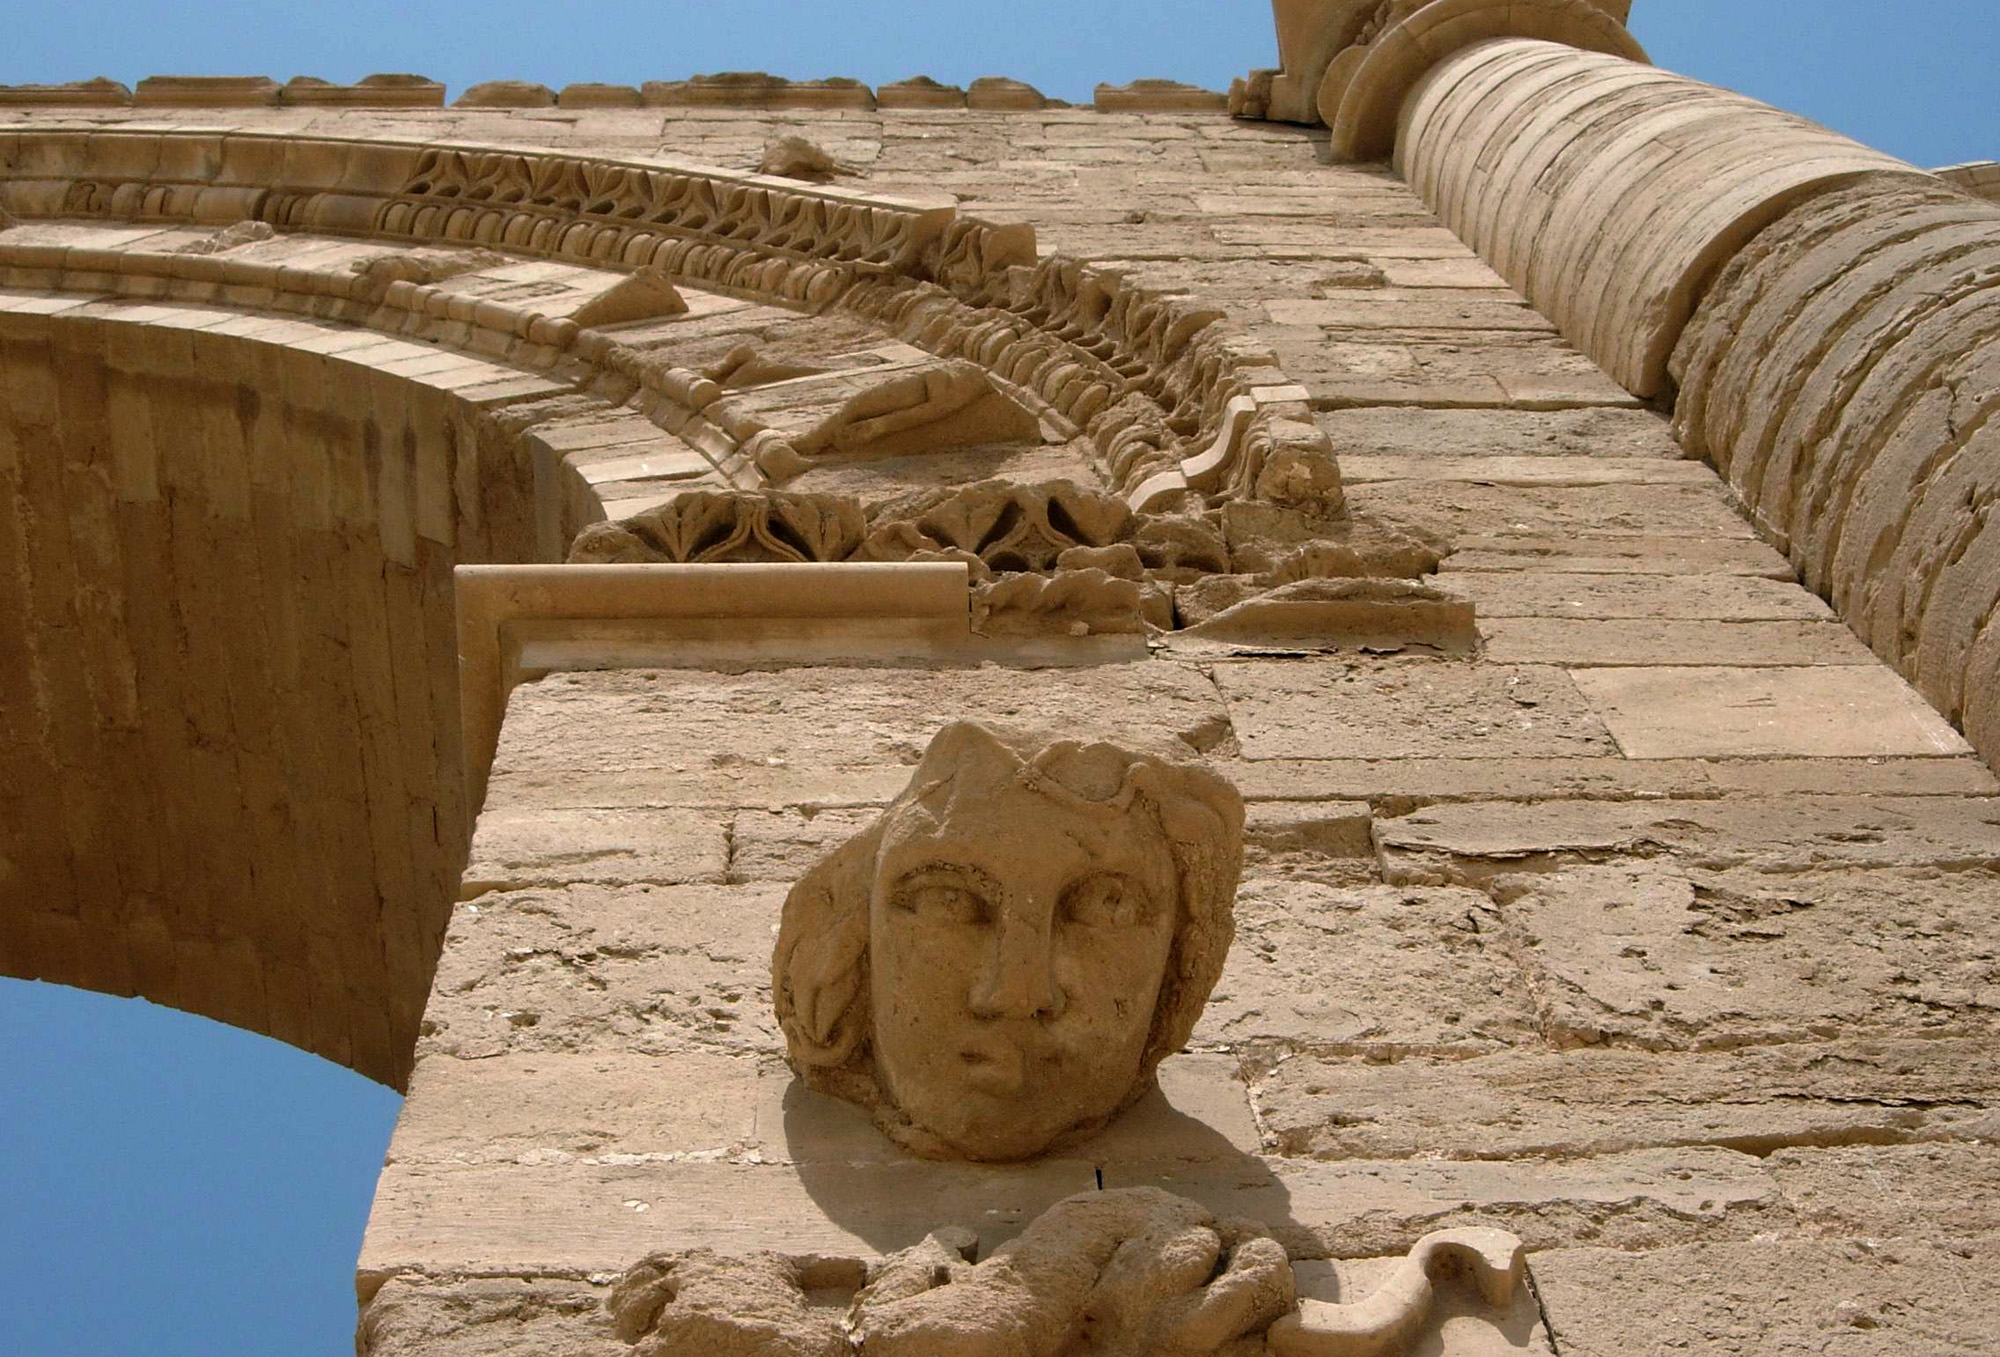 PHOTO: In this July 27, 2005 file photo, the face of a woman stares down at visitors in the Hatra ruins, 320 kilometers (200 miles) north of Baghdad, Iraq. 